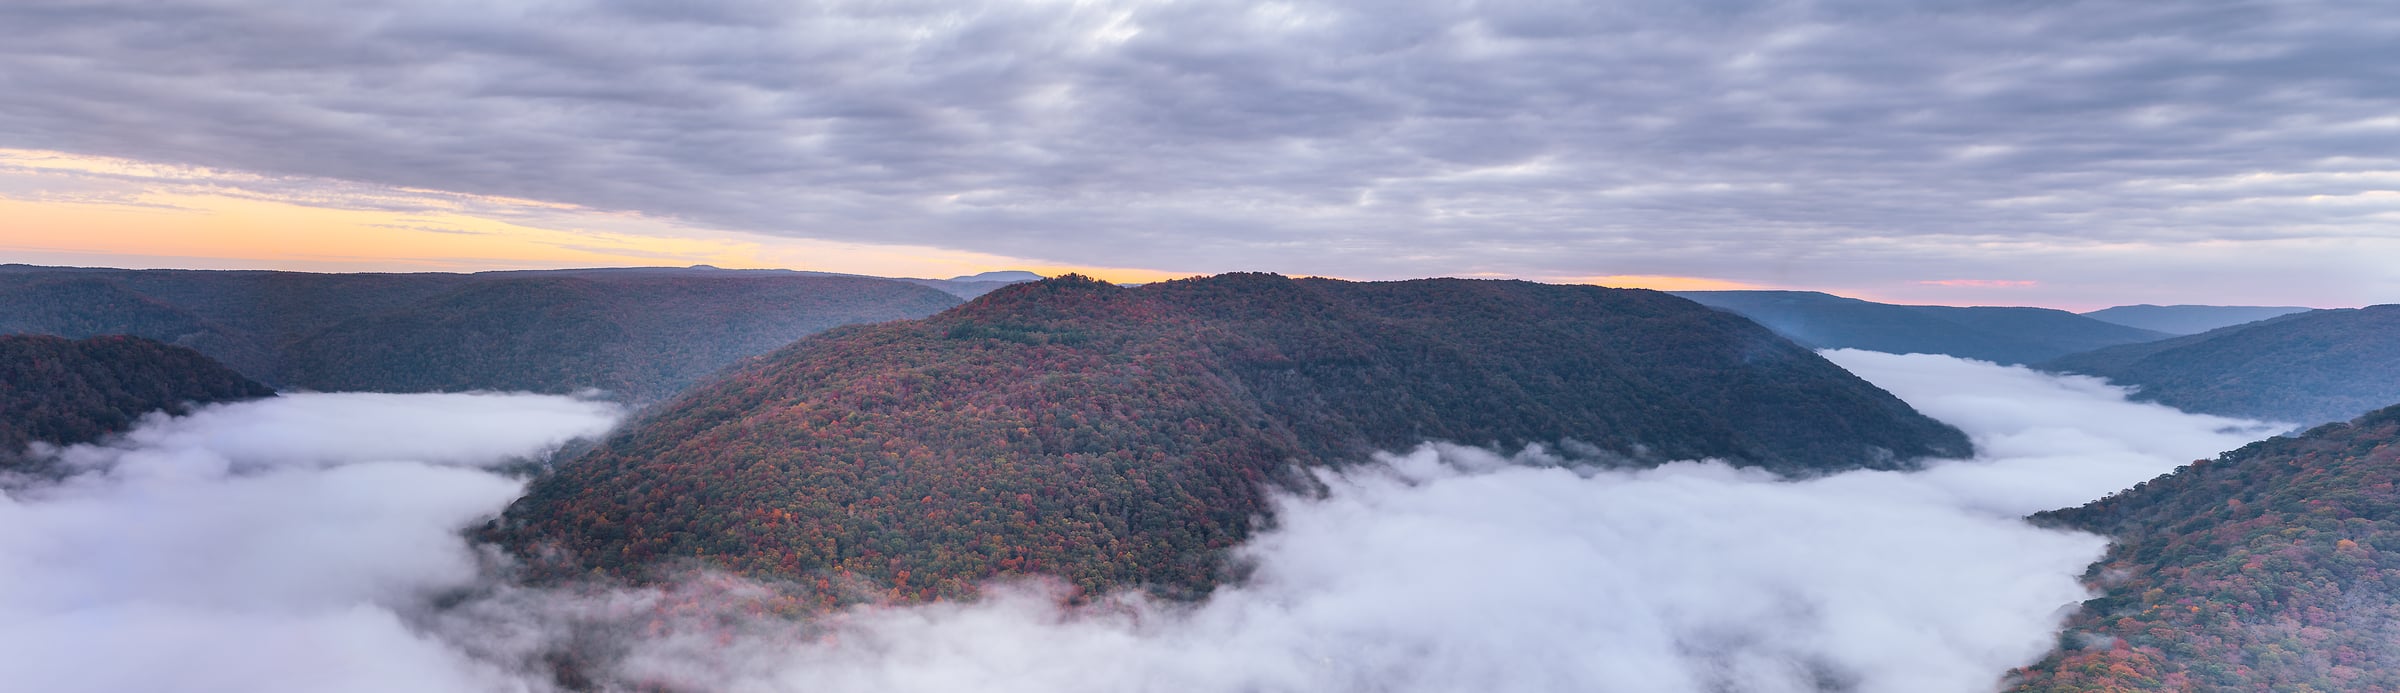 570 megapixels! A very high resolution, large-format VAST photo print of the mountains of New River Gorge National Park at sunrise with fog and autumn foliage; landscape photograph created by Chris Blake in New River Gorge National Park & Preserve, West Virginia.